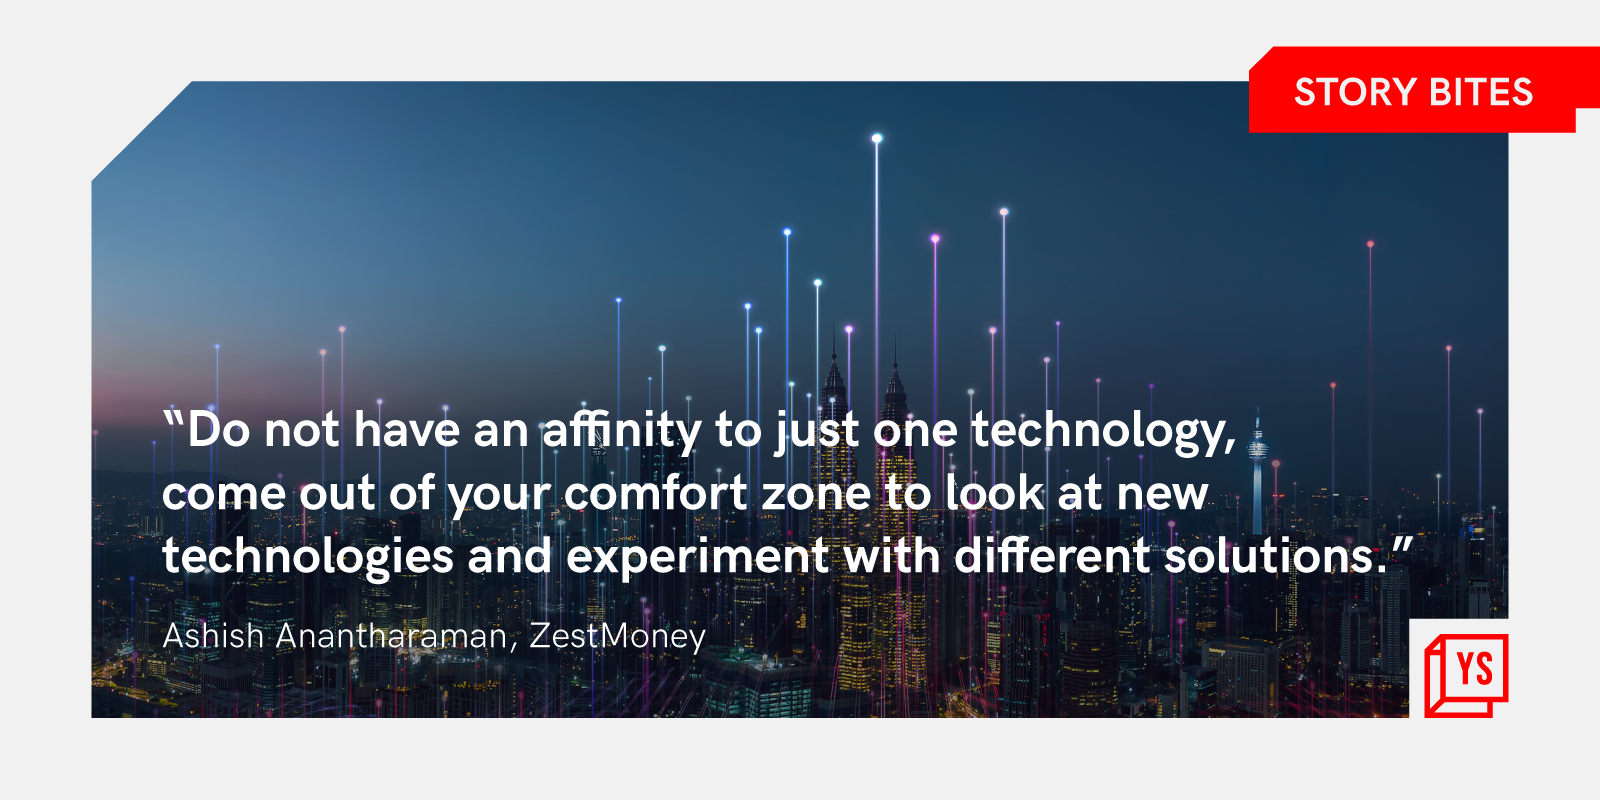 ‘Come out of your comfort zone to look at new technologies’ – 25 quotes of the week on digital transformation